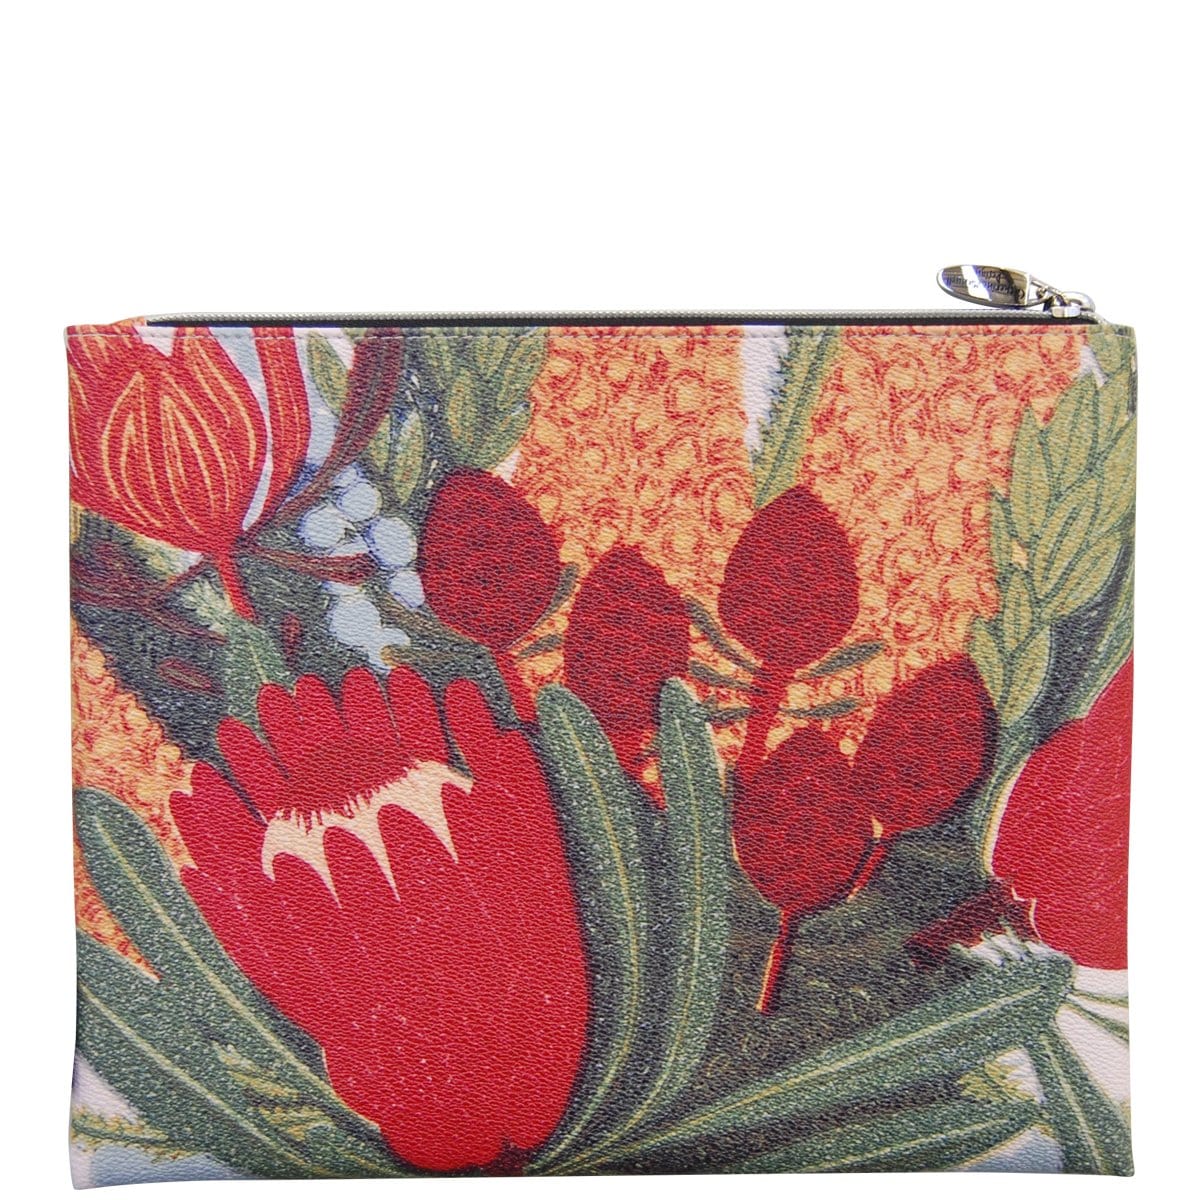 Floral Essentials Pouch - Native Posy